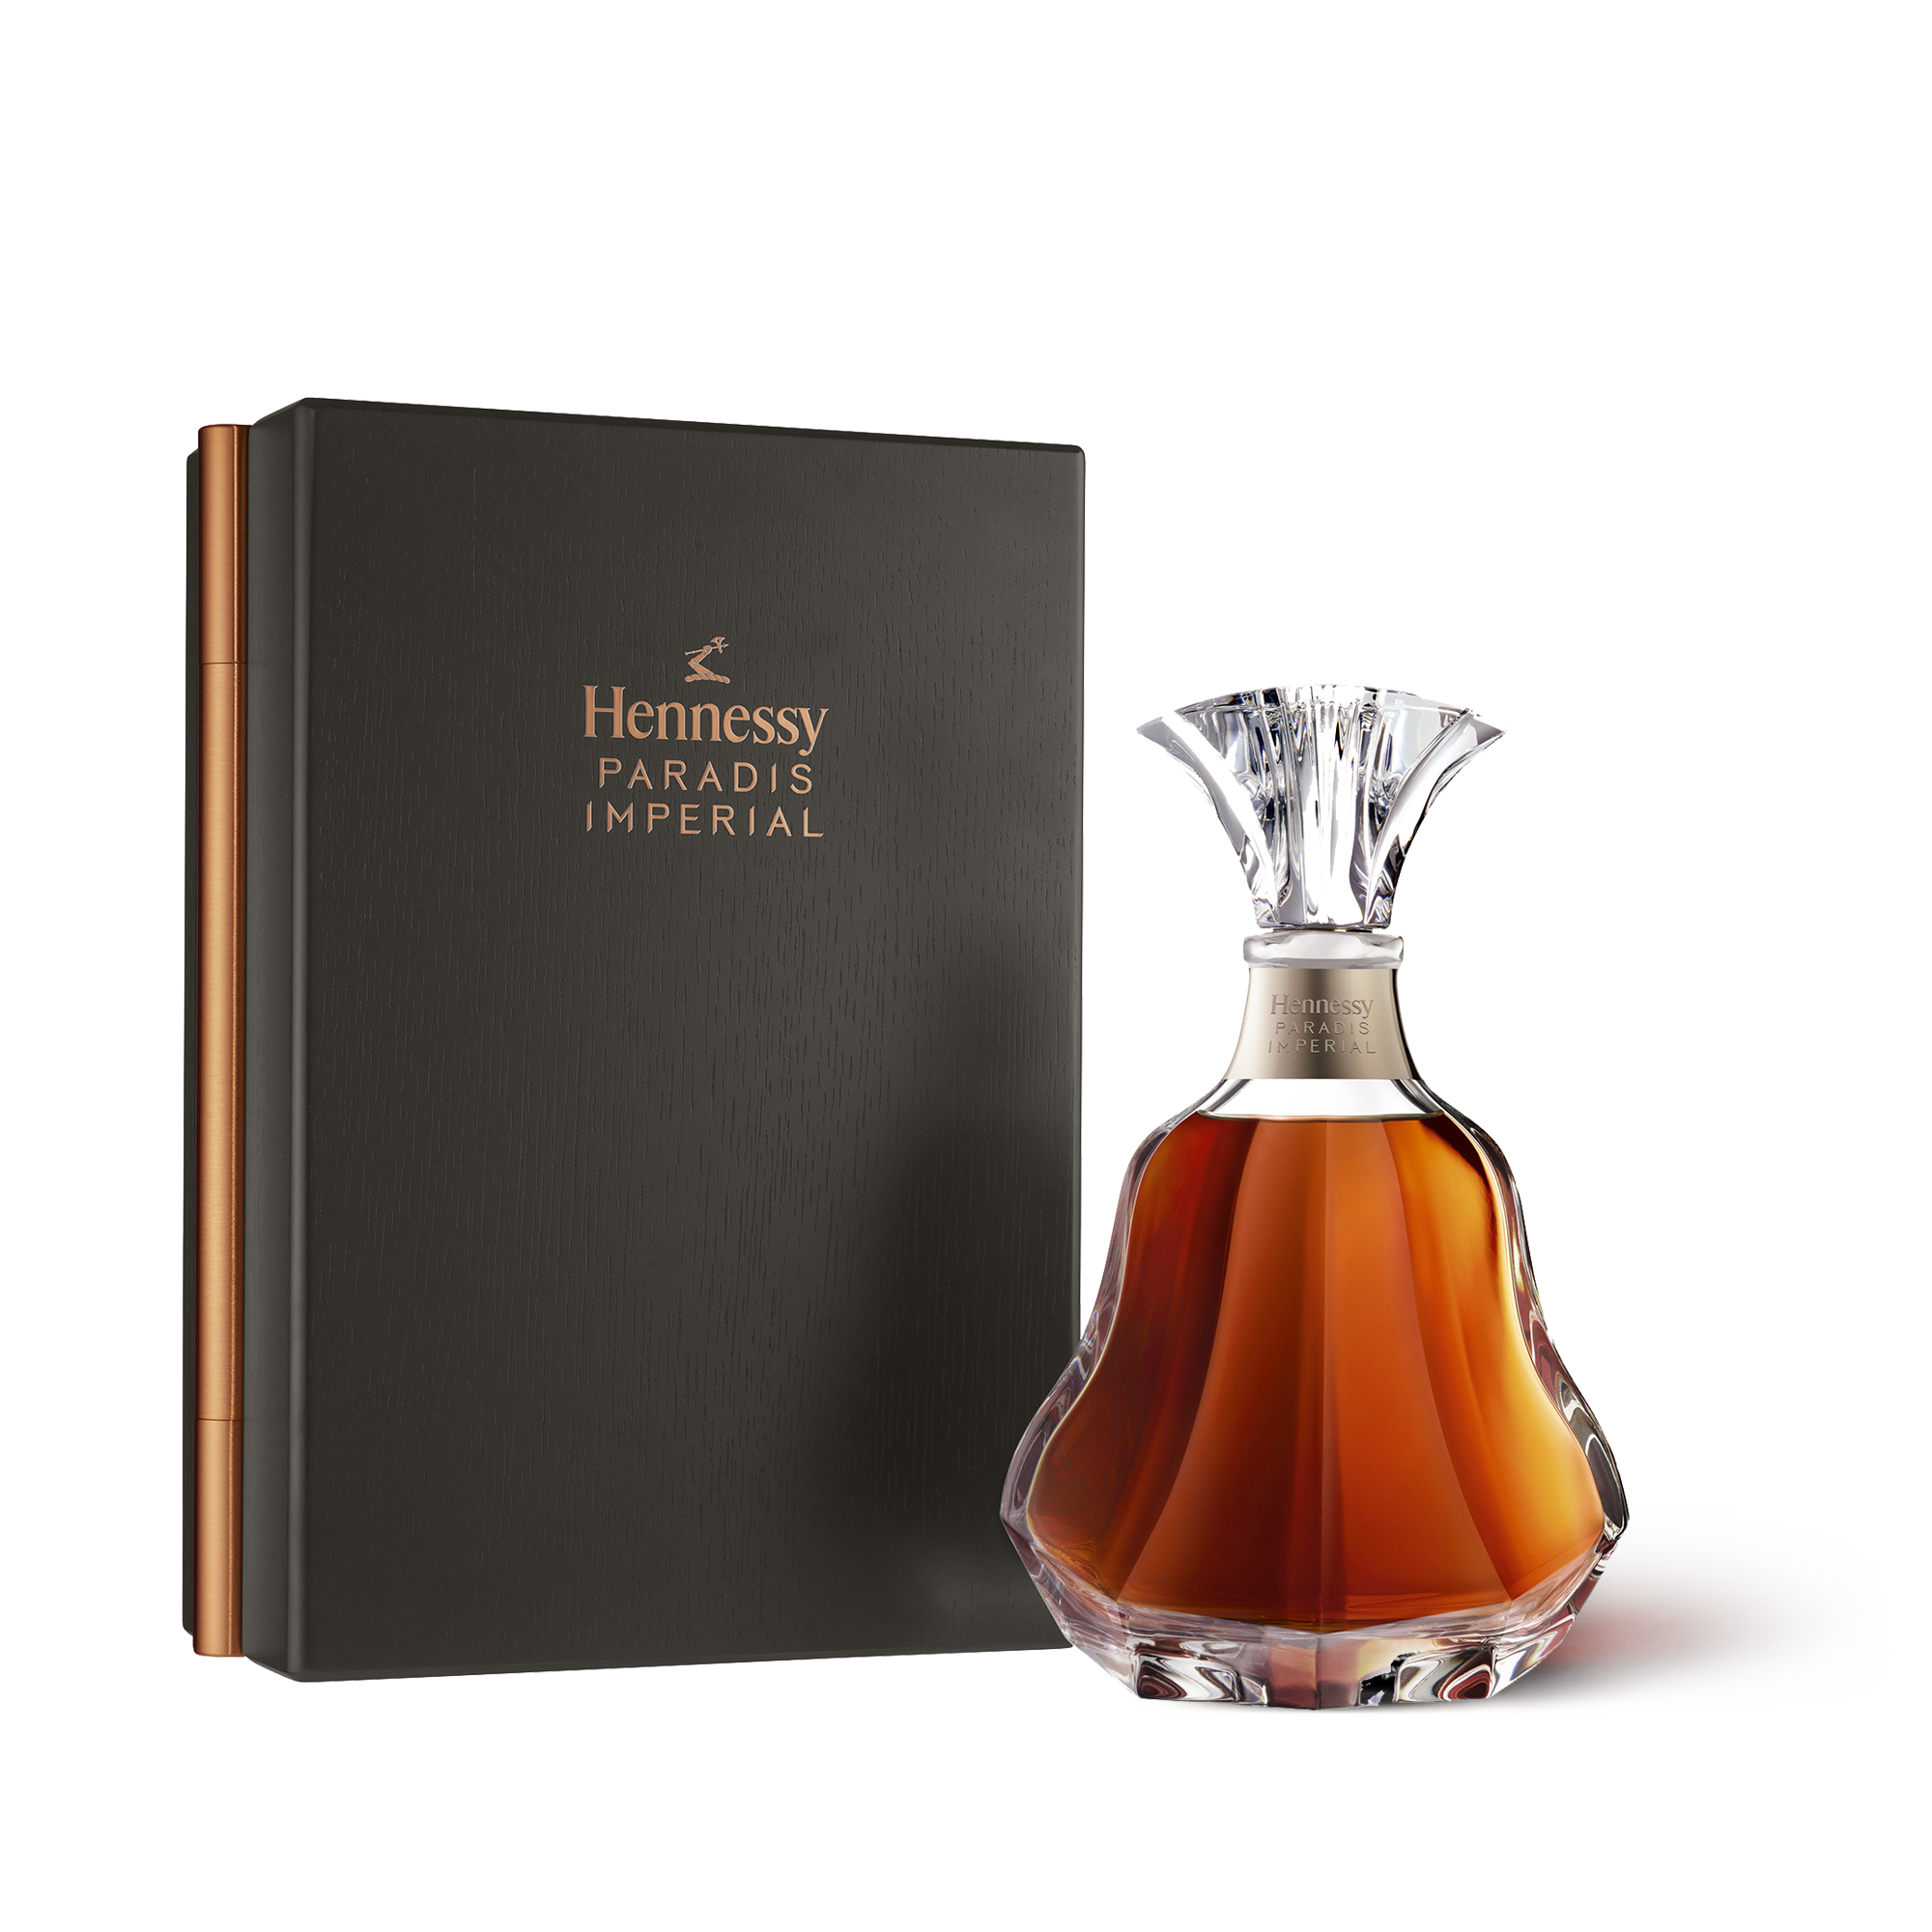 Aged cognac Hennessy Paradis Imperial, 75 cl with gift box | Hennessy